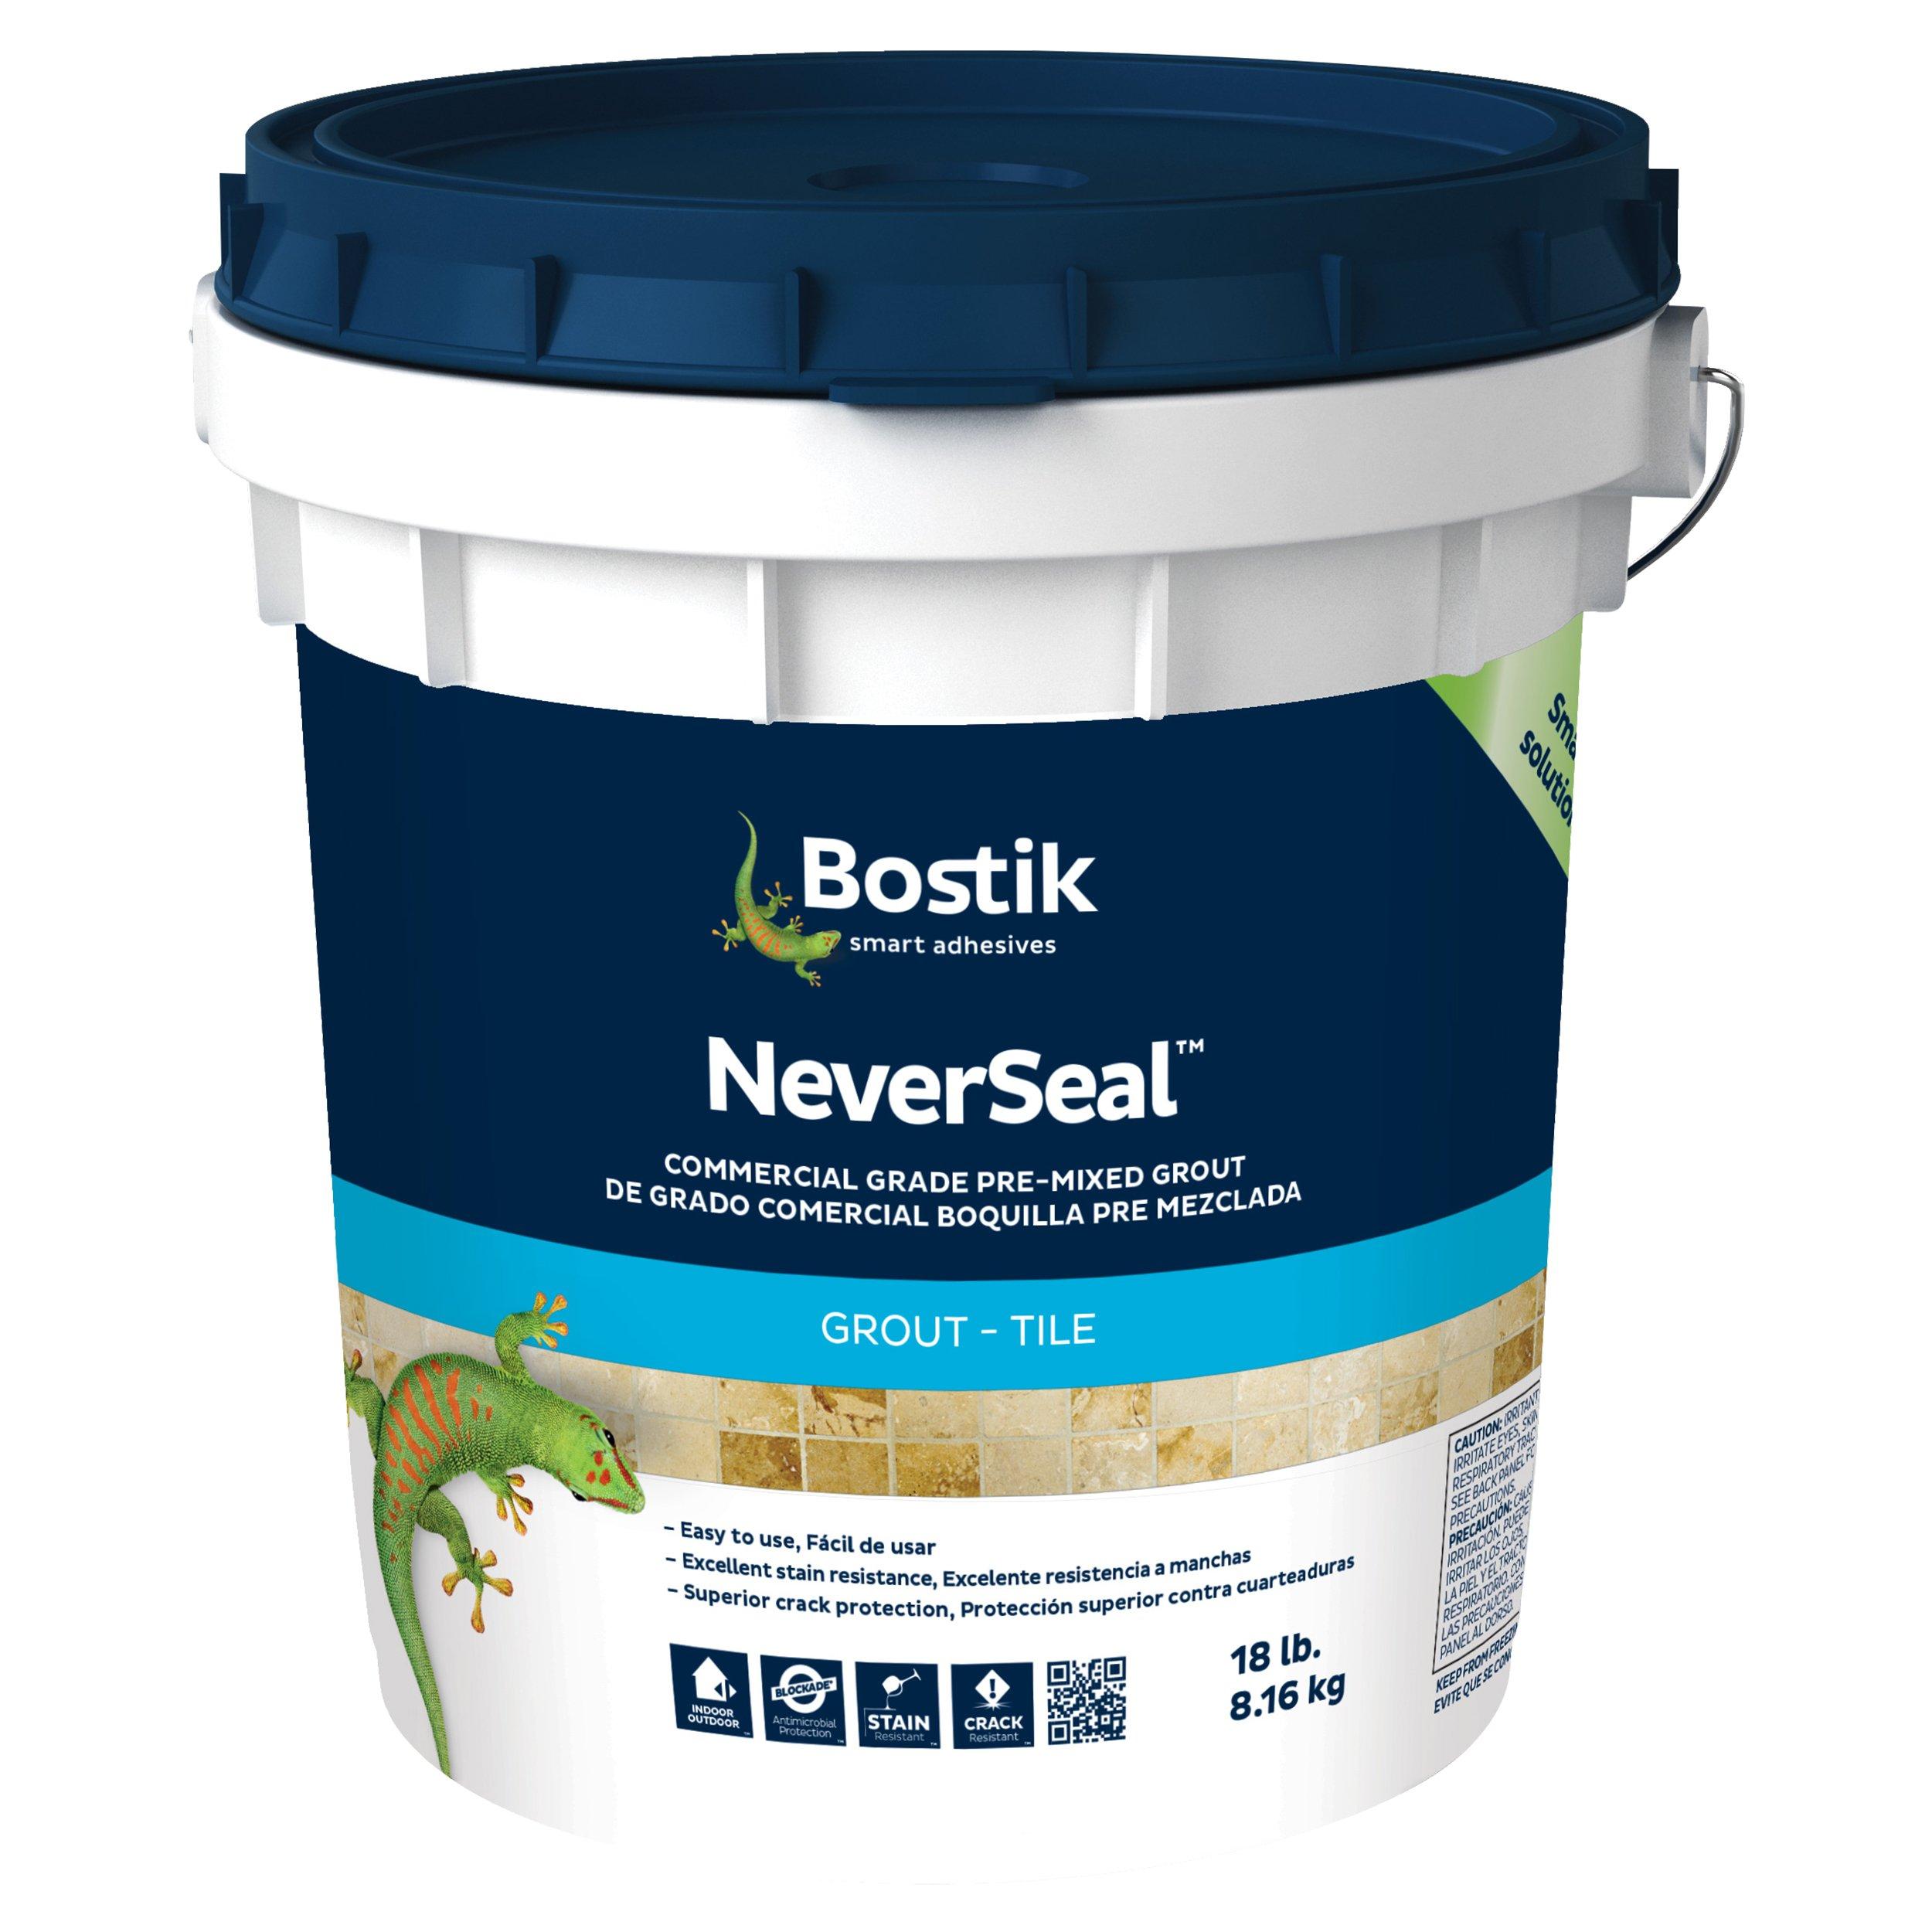 Bostik Neverseal Charcoal Gray Pre-Mixed Commercial Grade Grout